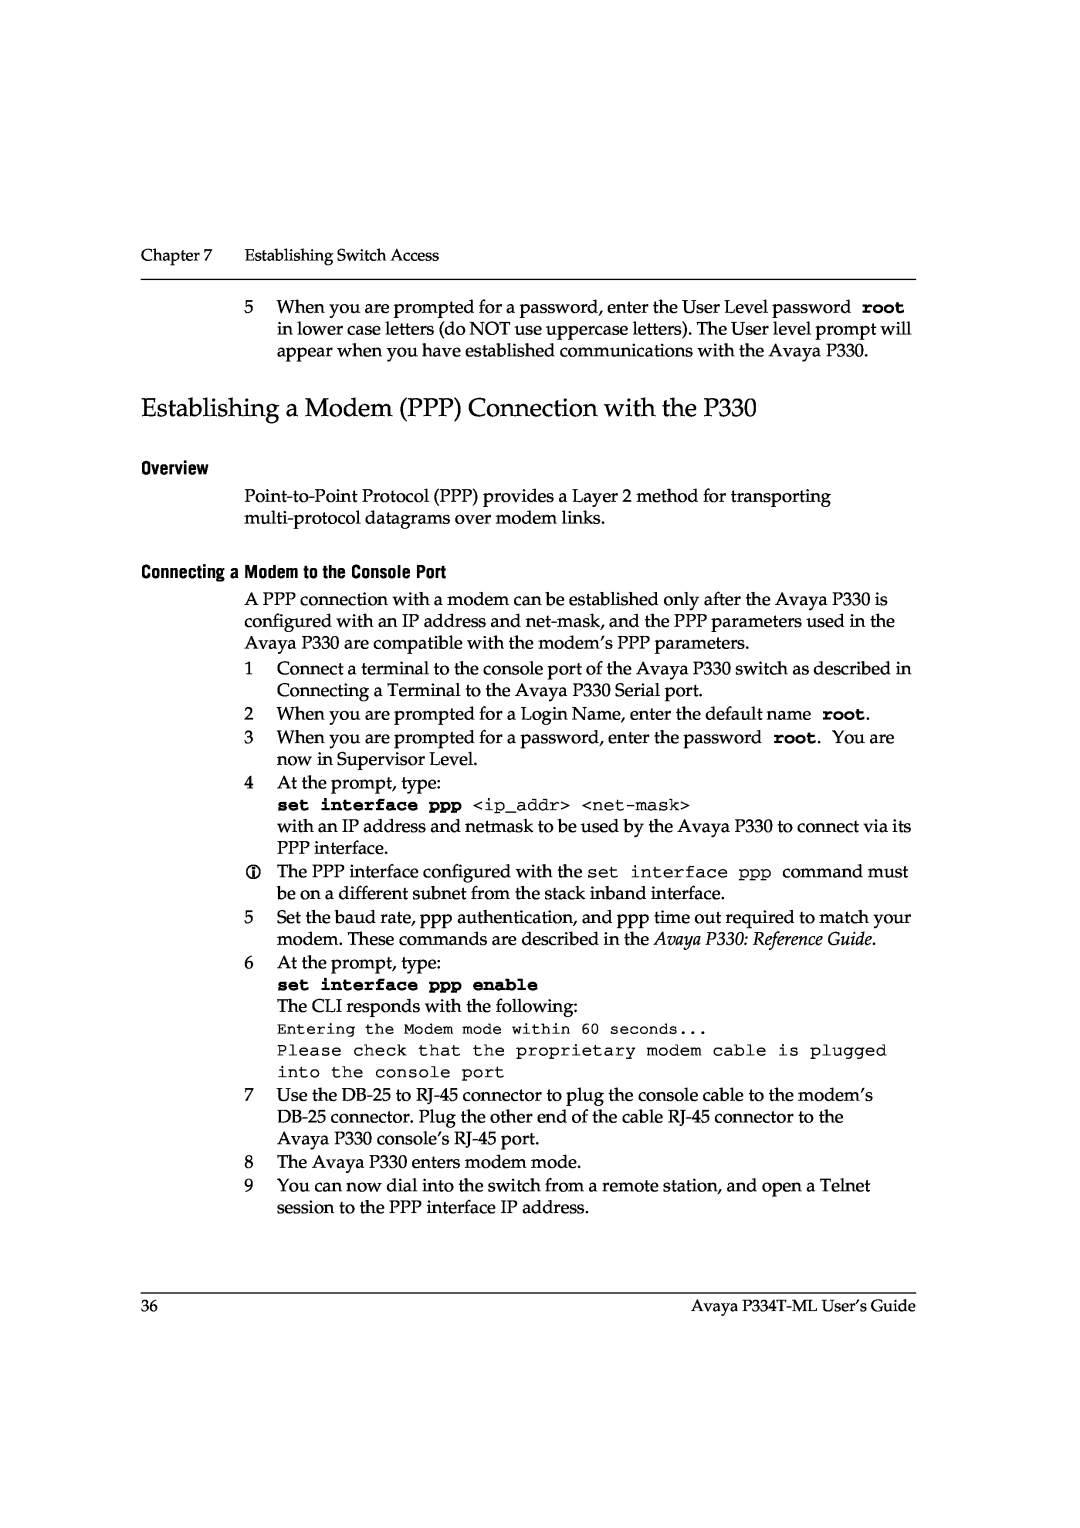 Avaya P3343T-ML manual Establishing a Modem PPP Connection with the P330, Overview, Connecting a Modem to the Console Port 